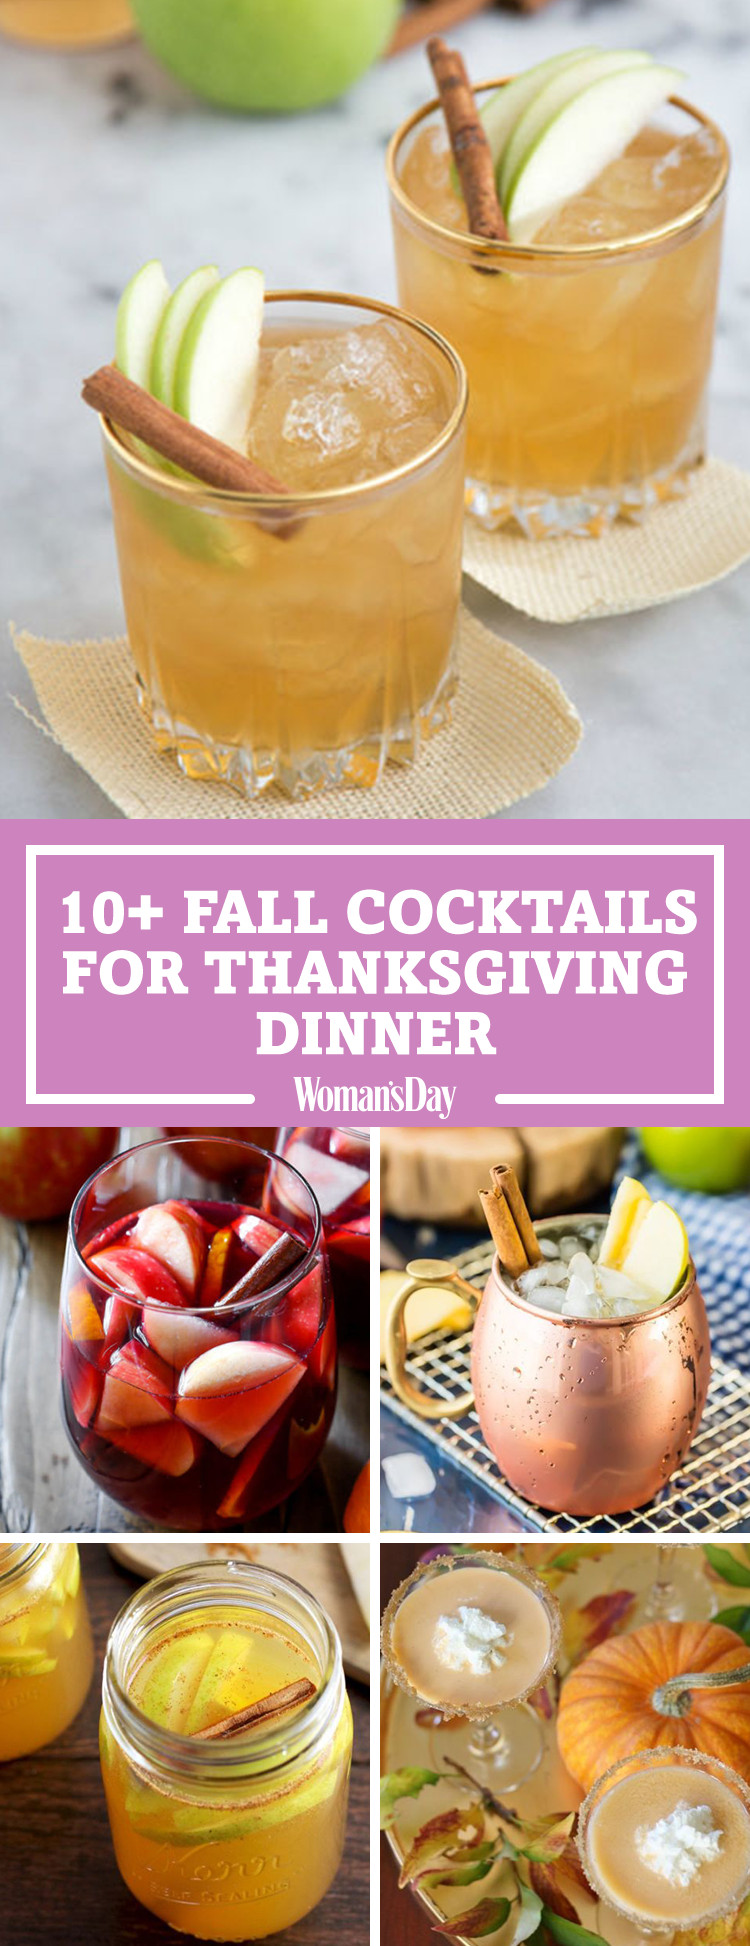 Thanksgiving Alcoholic Drinks
 14 Best Fall Cocktails for Thanksgiving Recipes for Easy